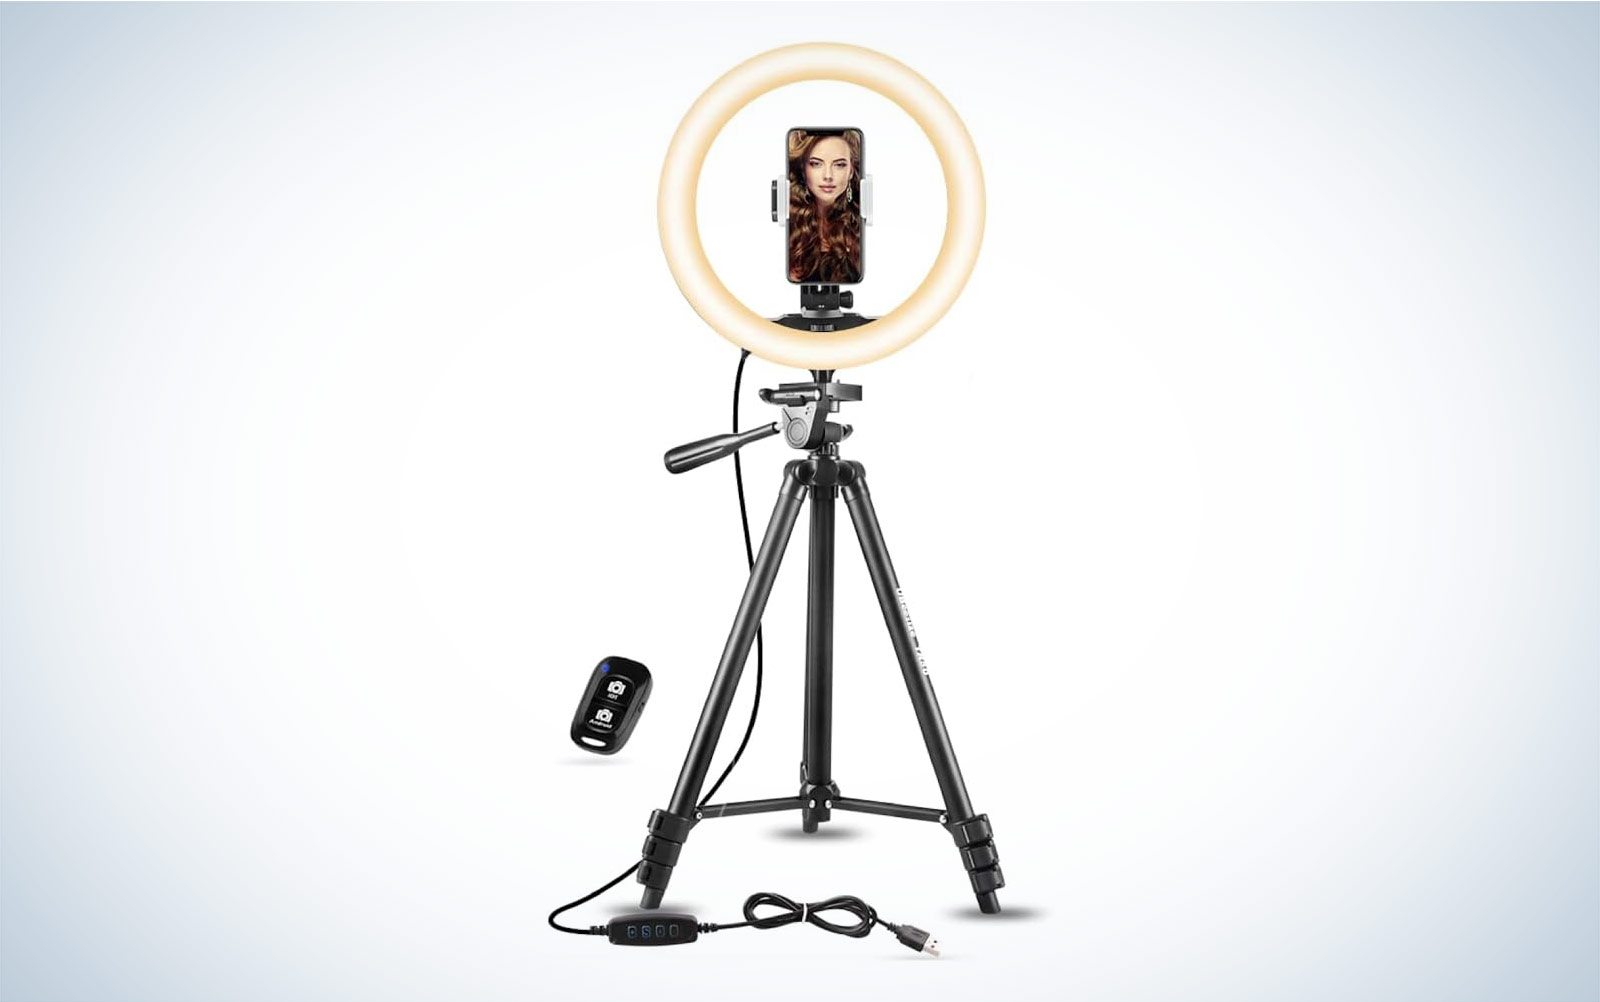 Buy Kreo Halo 12 Inch Selfie Ring Light| Portable, 3 Colour Modes, Youtube  Ready | Dimmable and Bright Lighting for Instagram, Reels, YouTube, Makeup,  Live Stream, Vlog, Works with iPhone, Android &